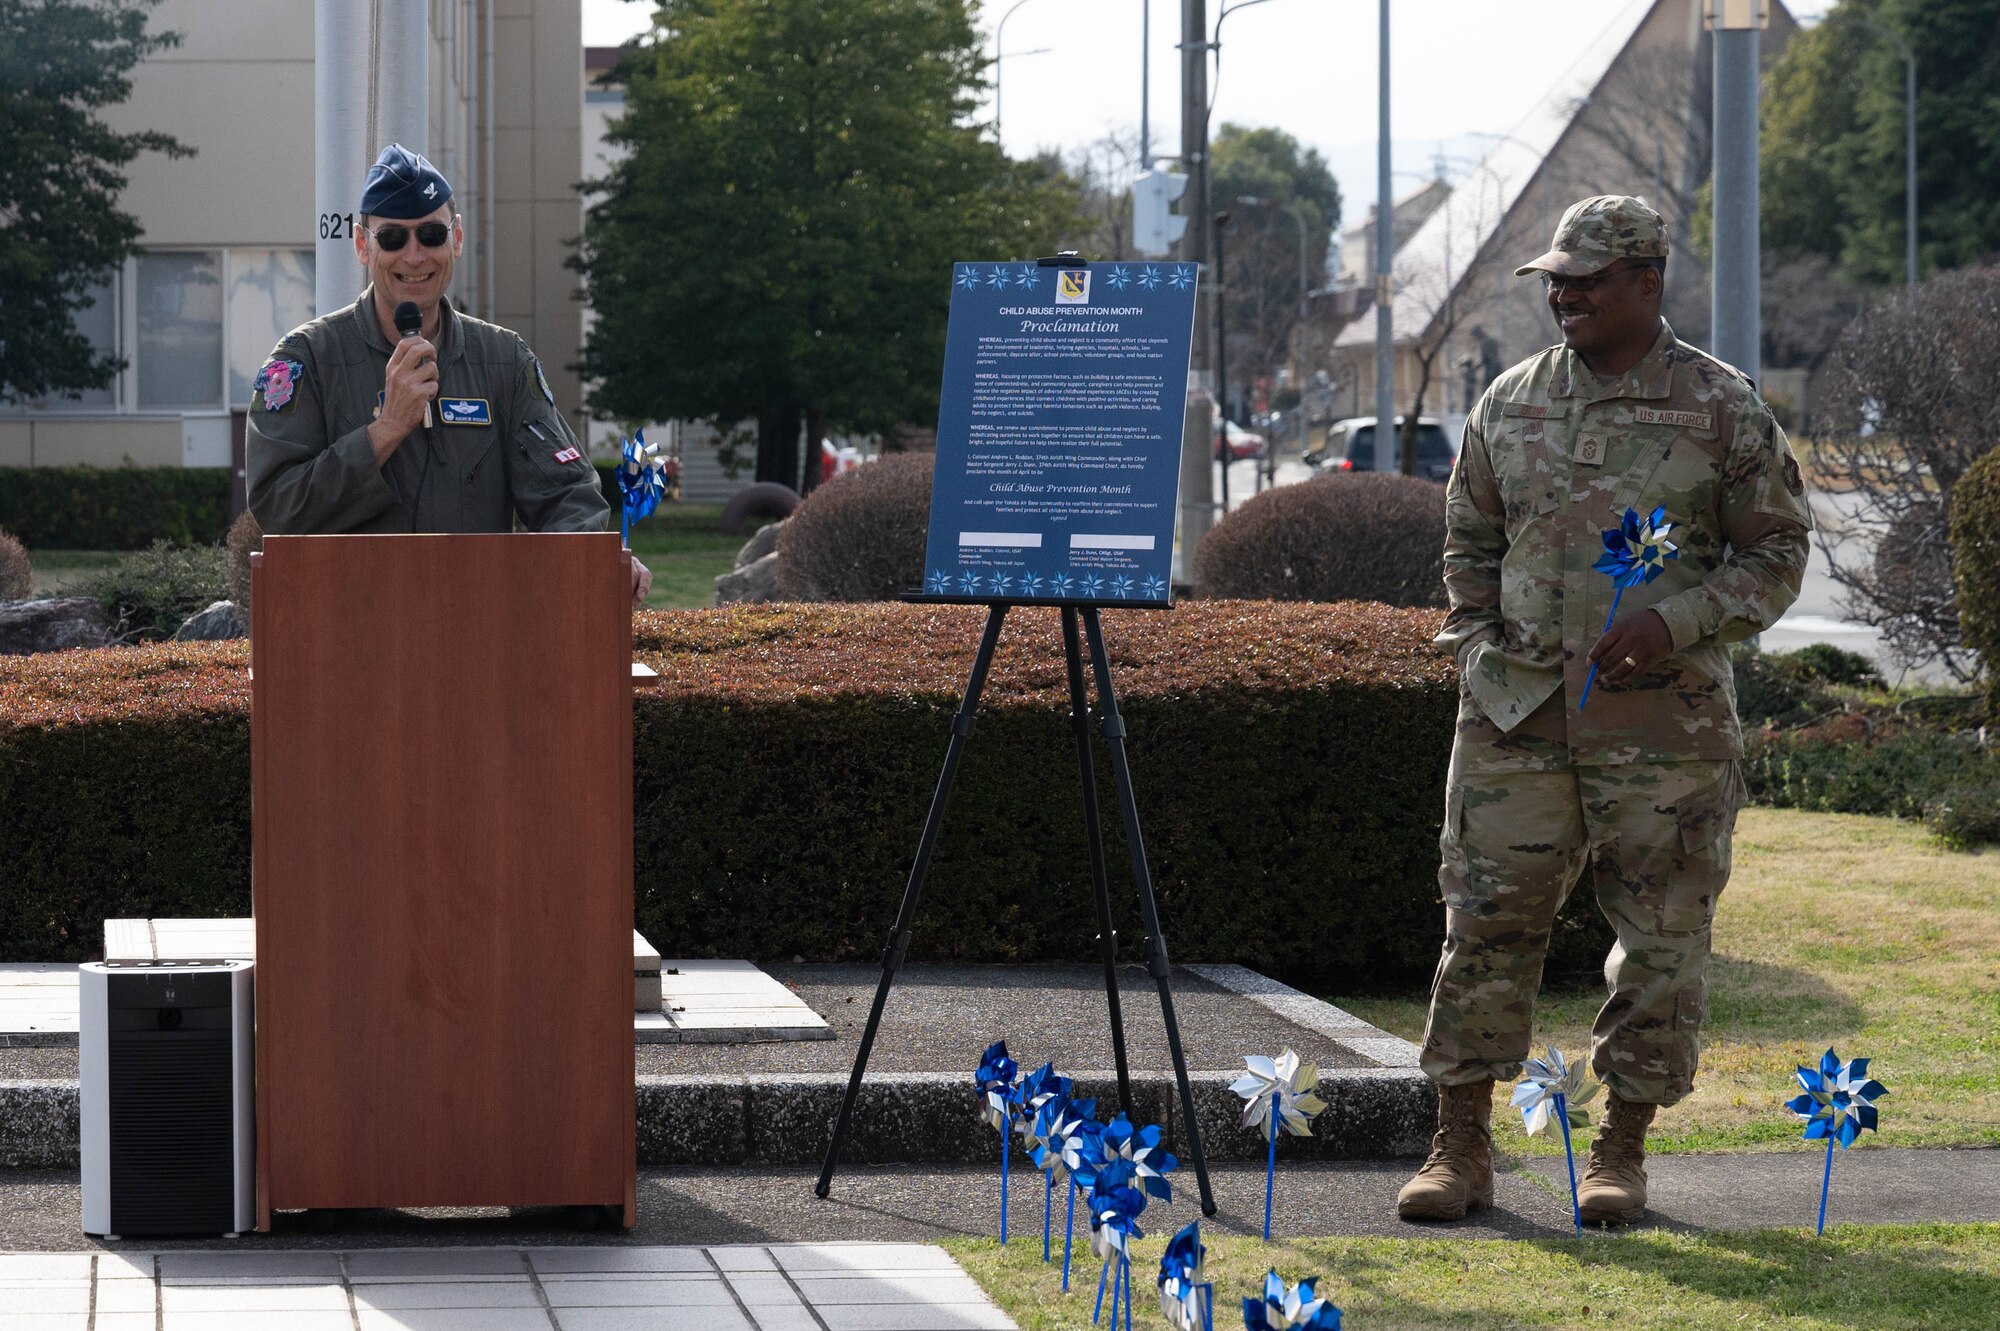 An Airman speaks at a podium and another Airman stands to the side while holding a pinwheel.